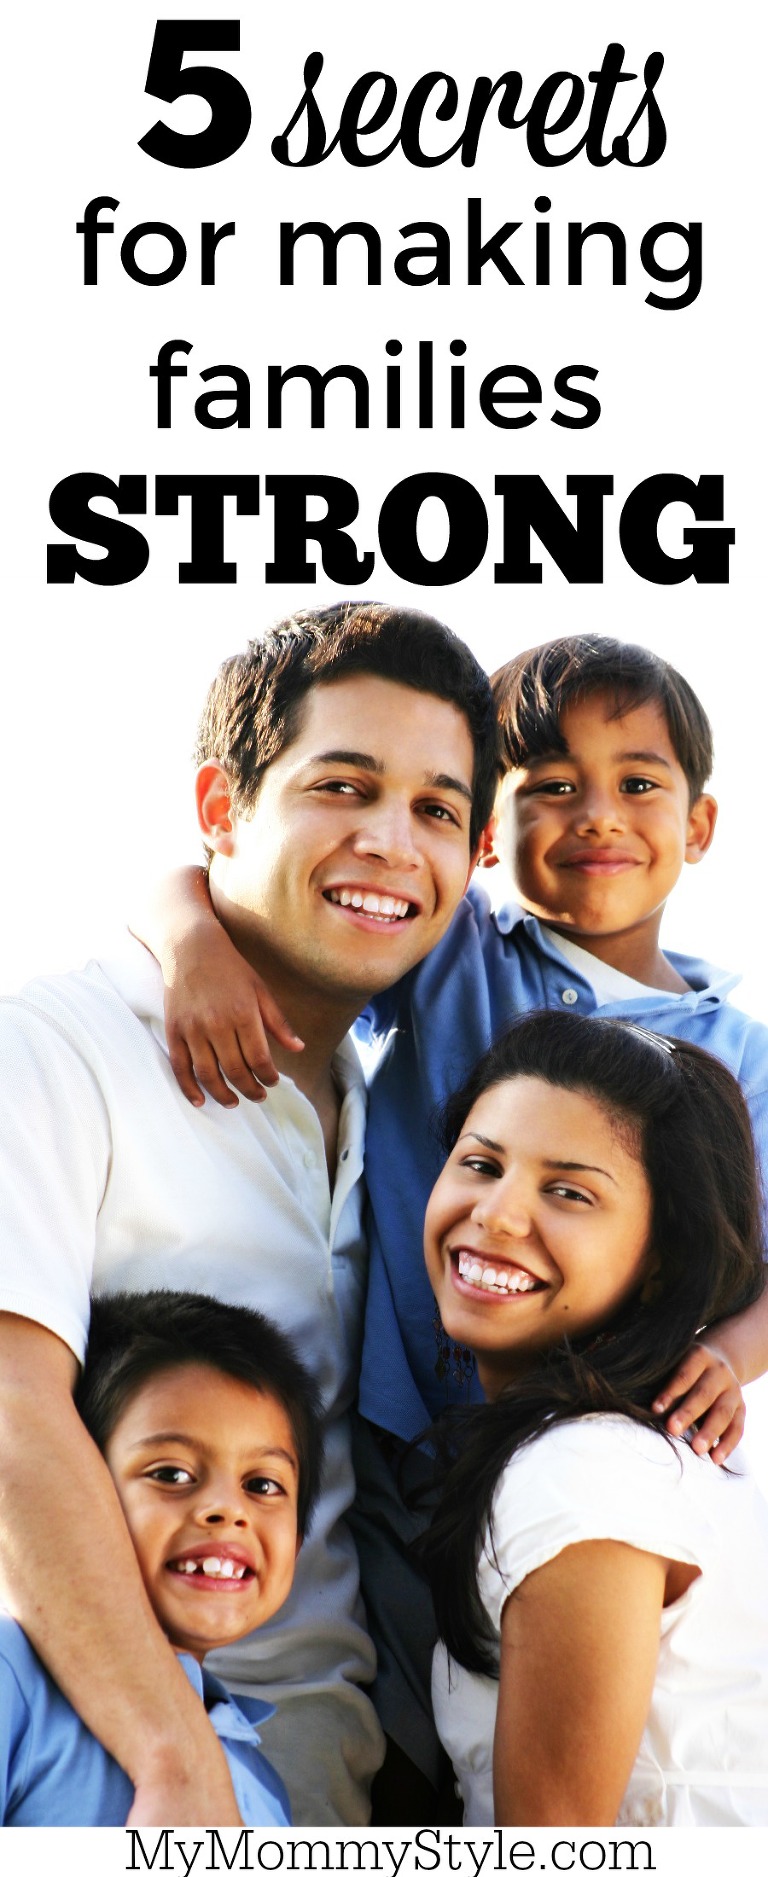 5-secrets-for-making-families-strong